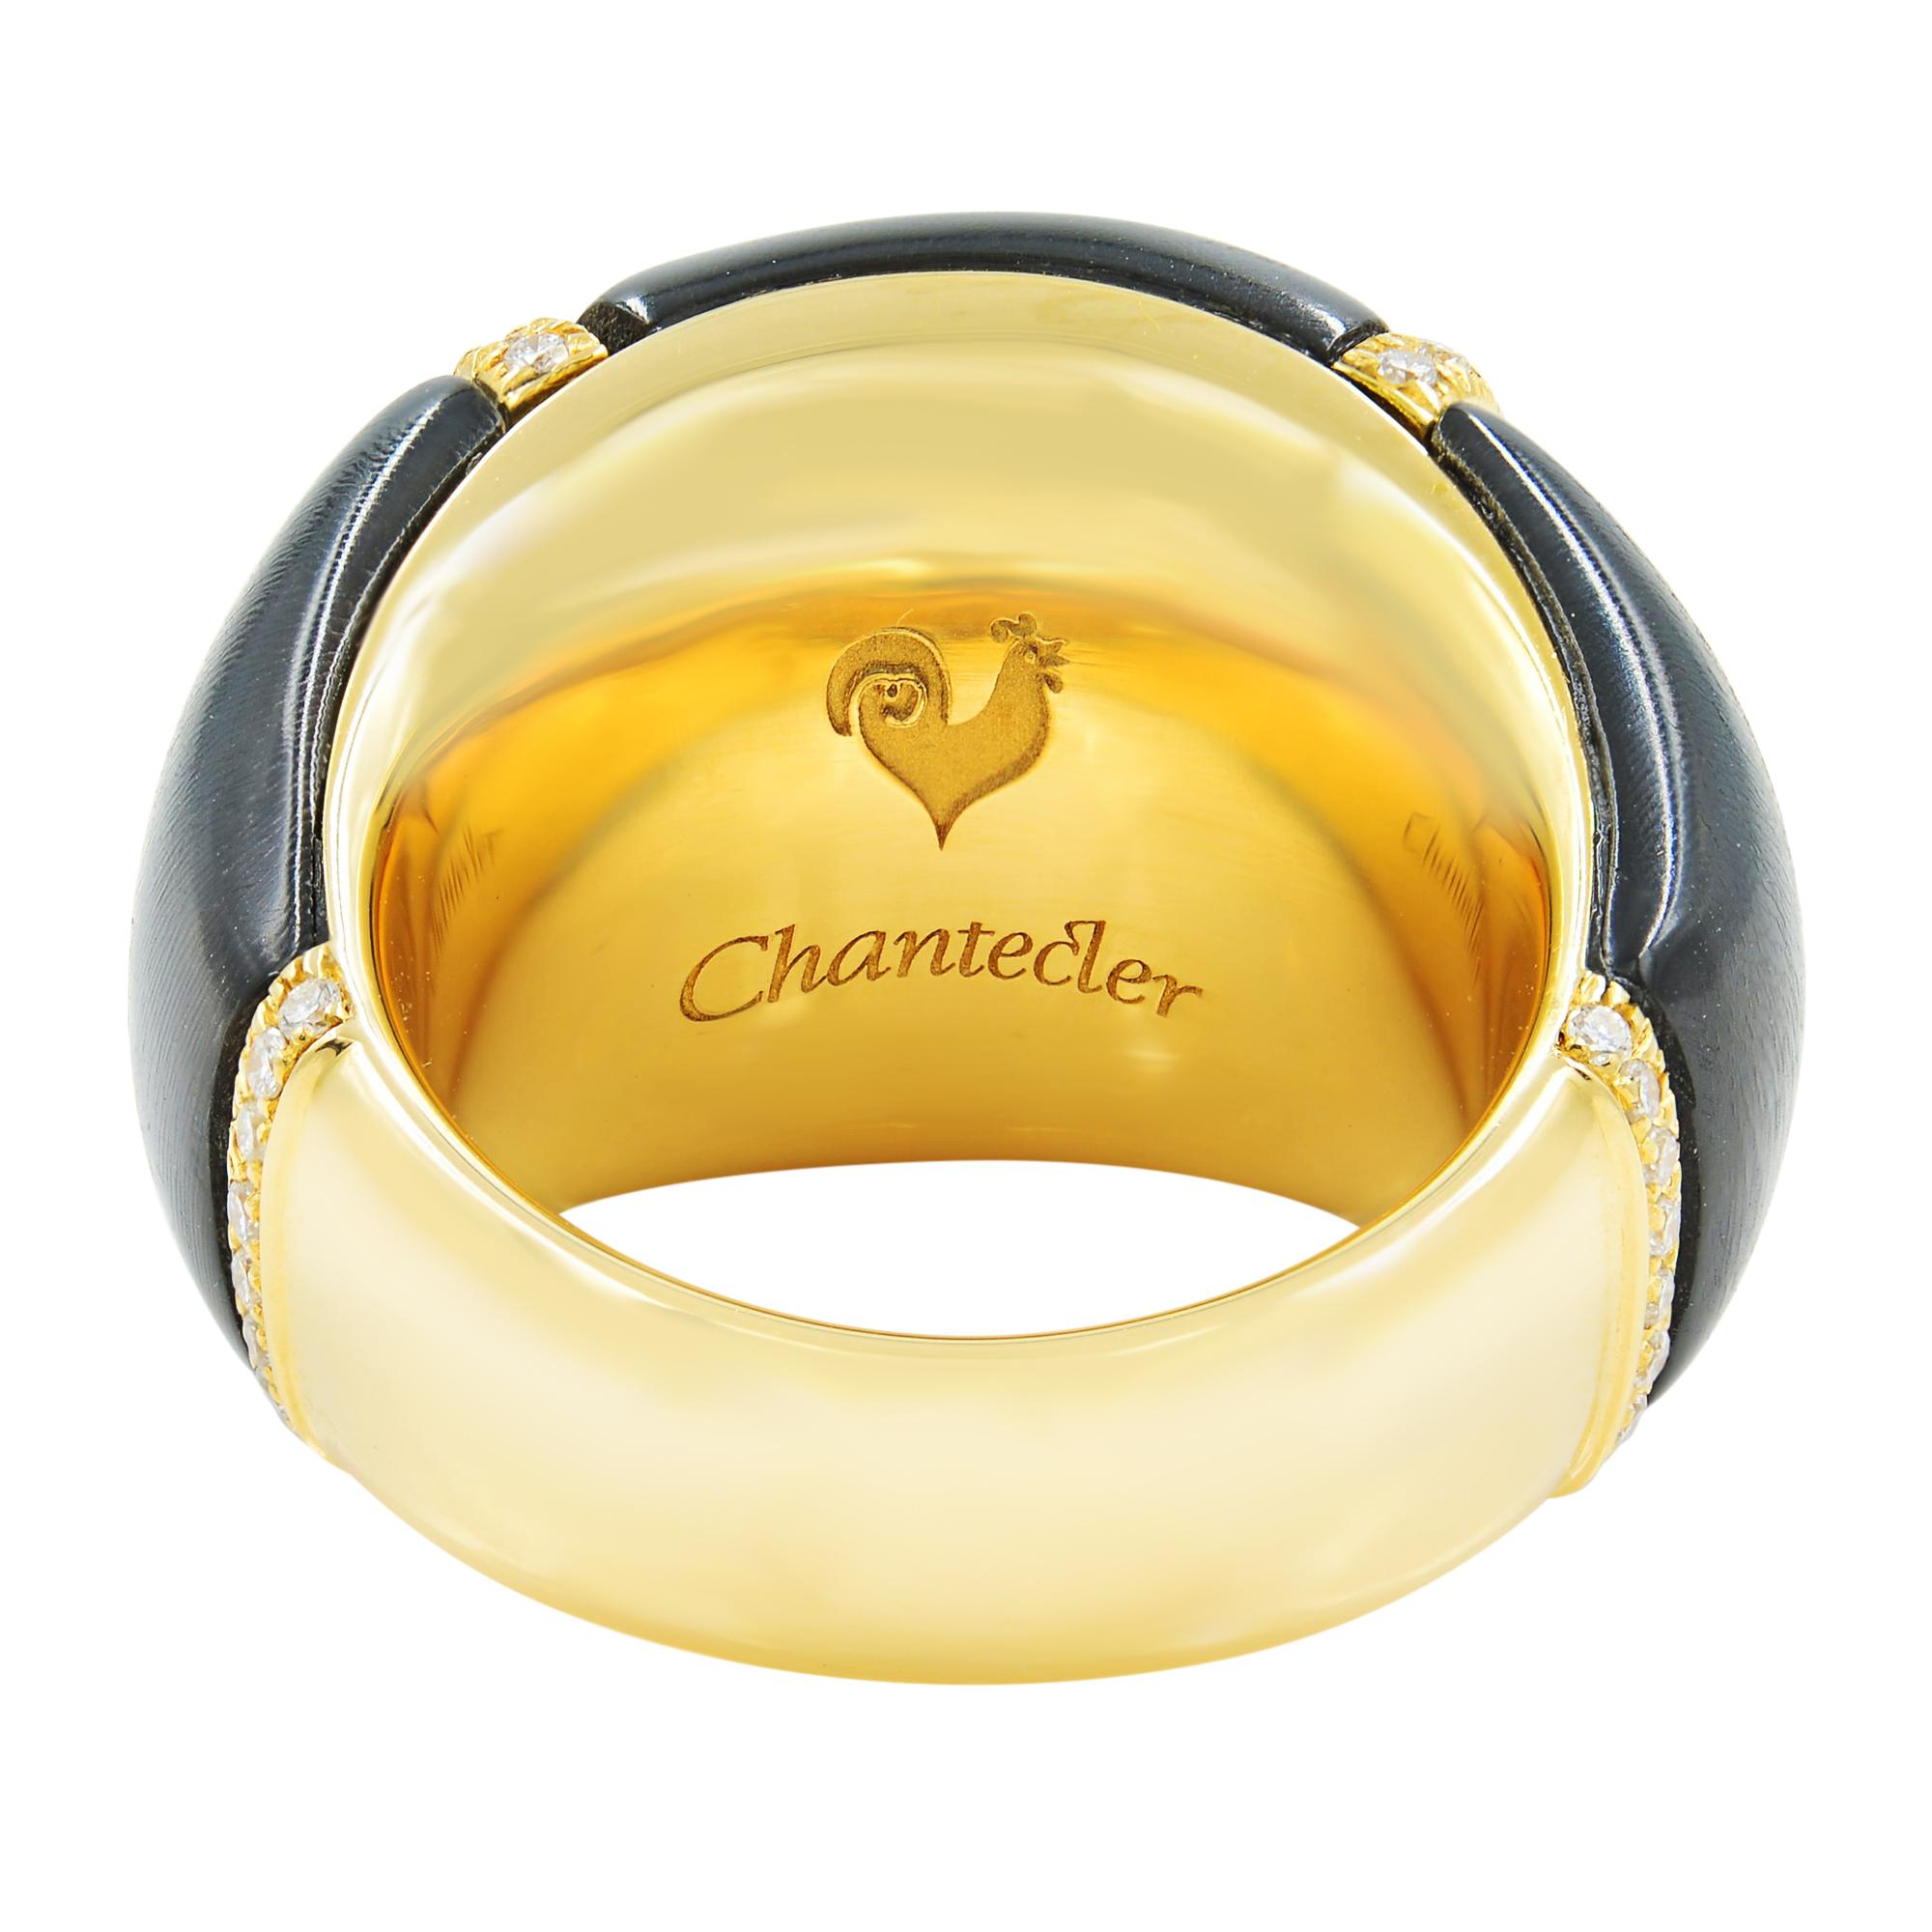 Round Cut Chantecler Black Onyx Diamond Dome Shaped Ring 18k Yellow Gold 0.50cttw Size 6.5 For Sale